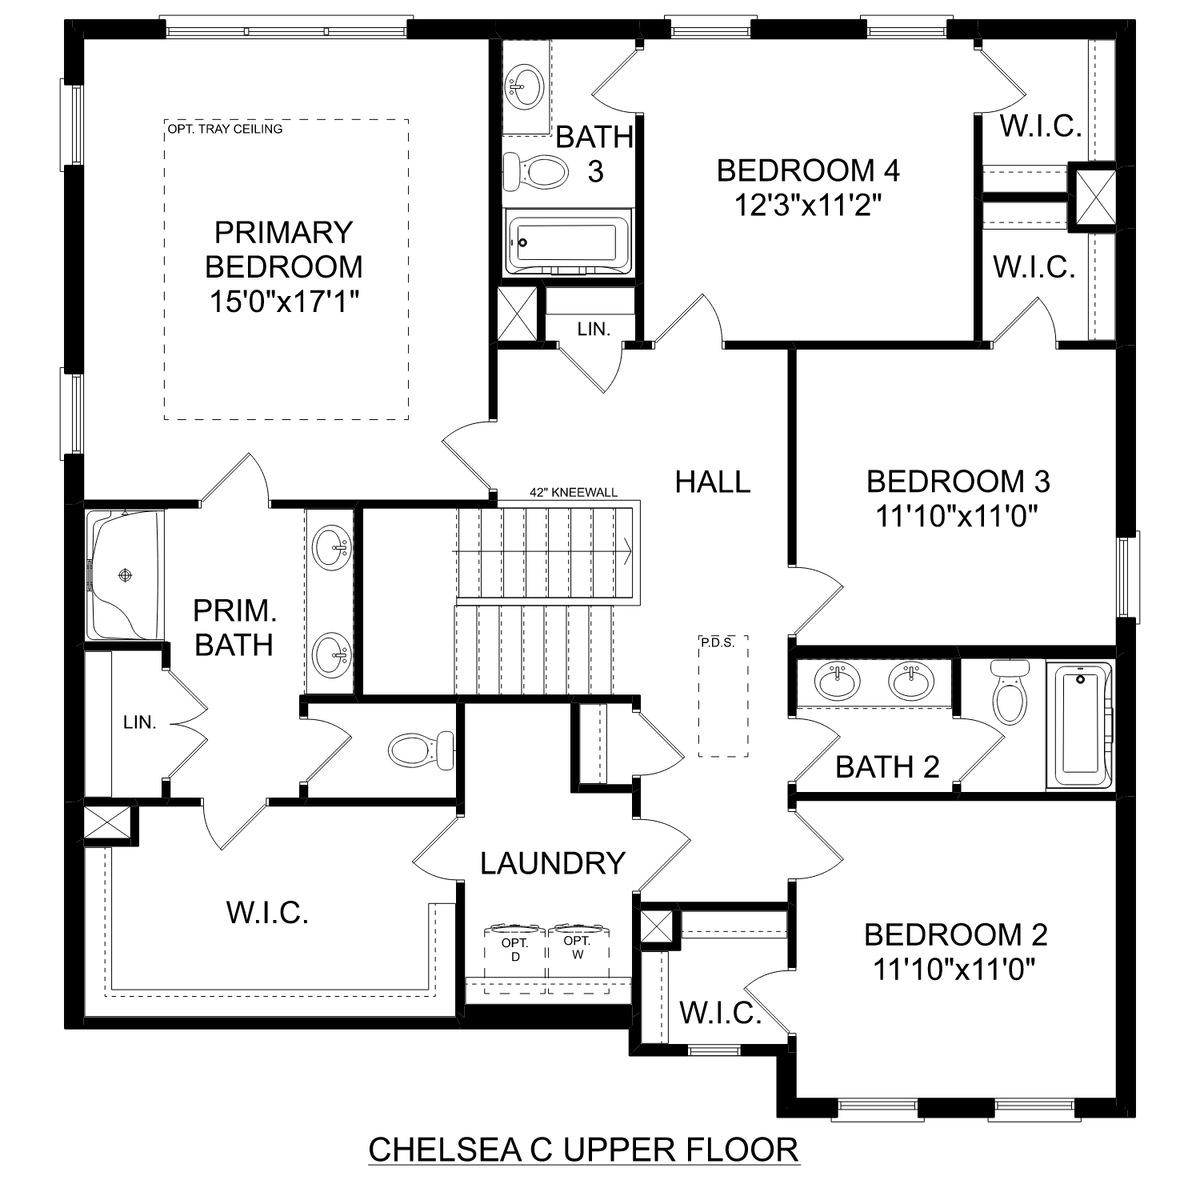 2 - The Chelsea C floor plan layout for 101 Shearwater Drive in Davidson Homes' Walker's Hill community.